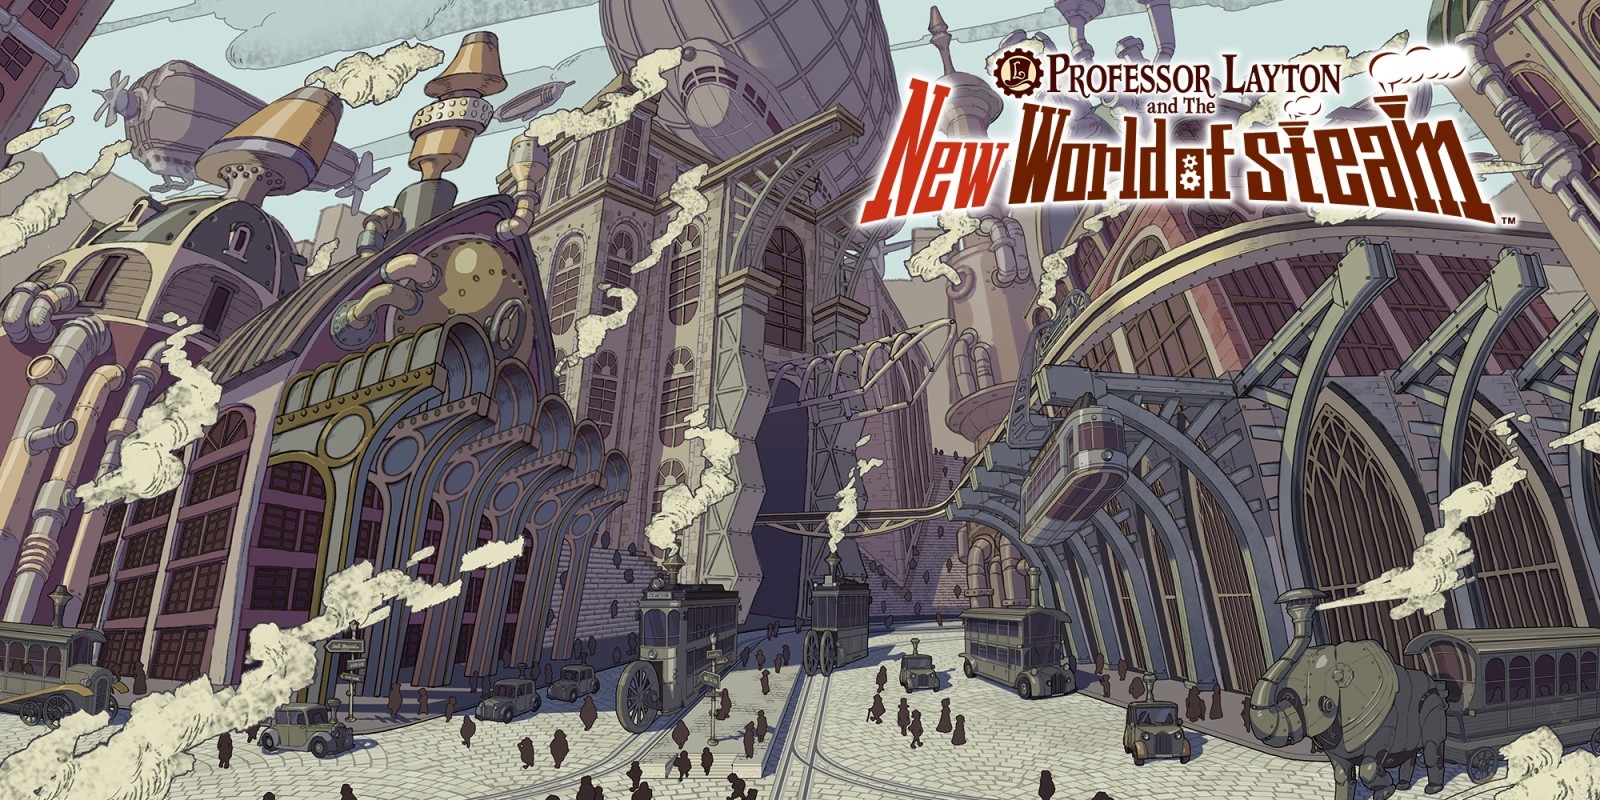 Professor Layton and The New World of steam